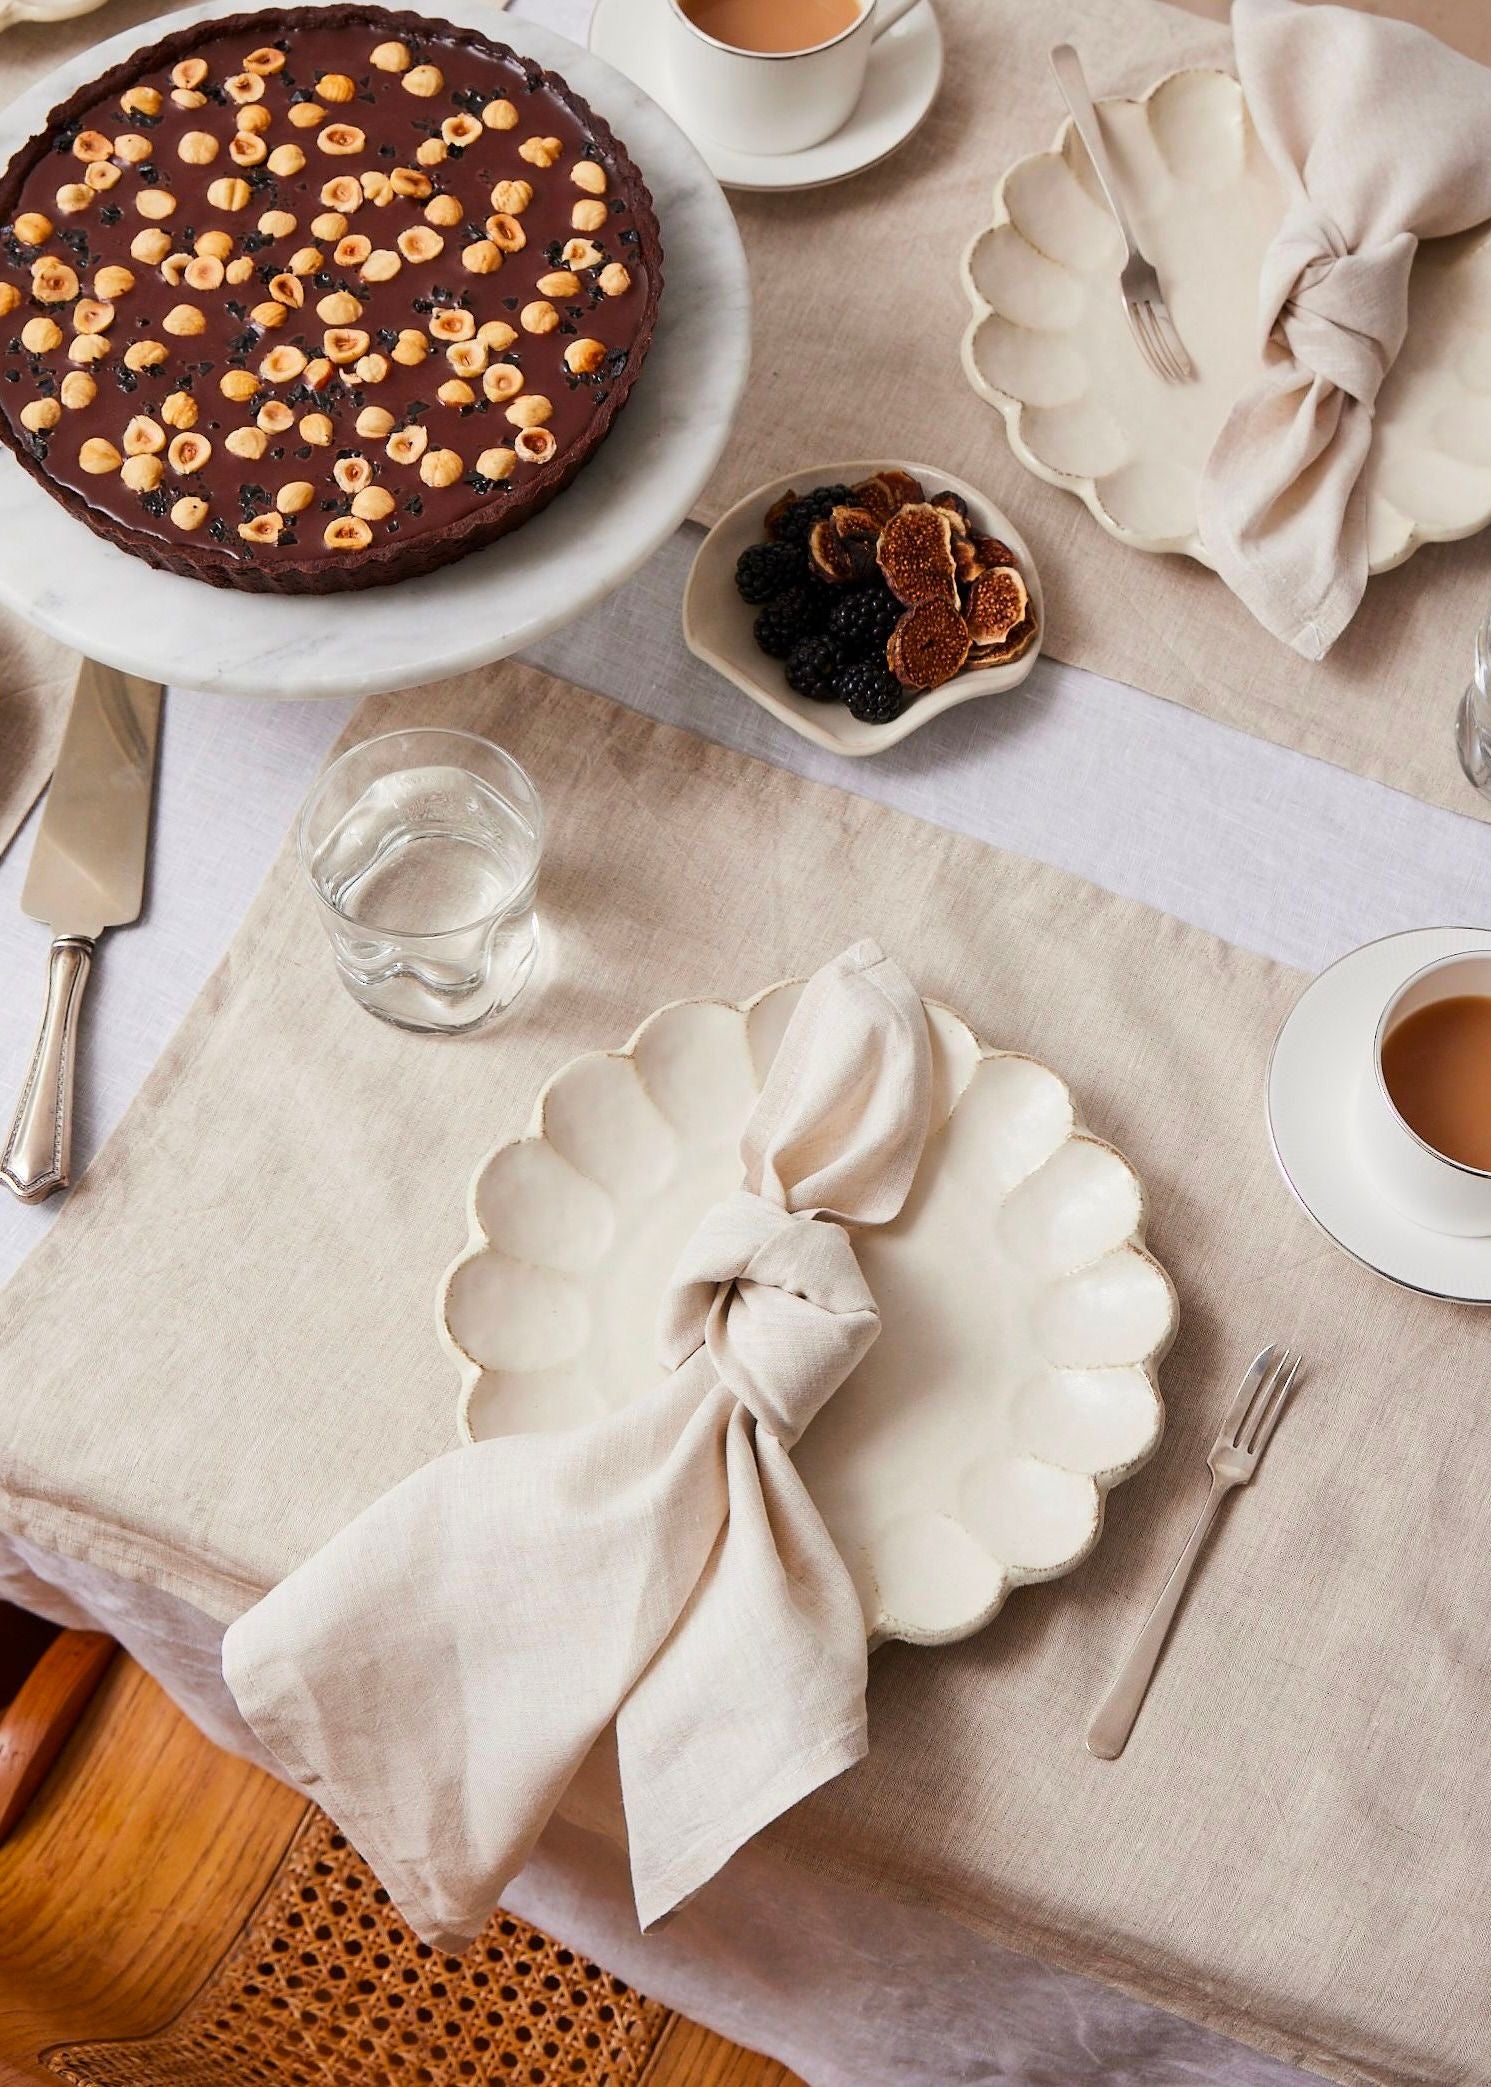 5 Easy Ways to Fold Napkins for Your Holiday Dinner Table